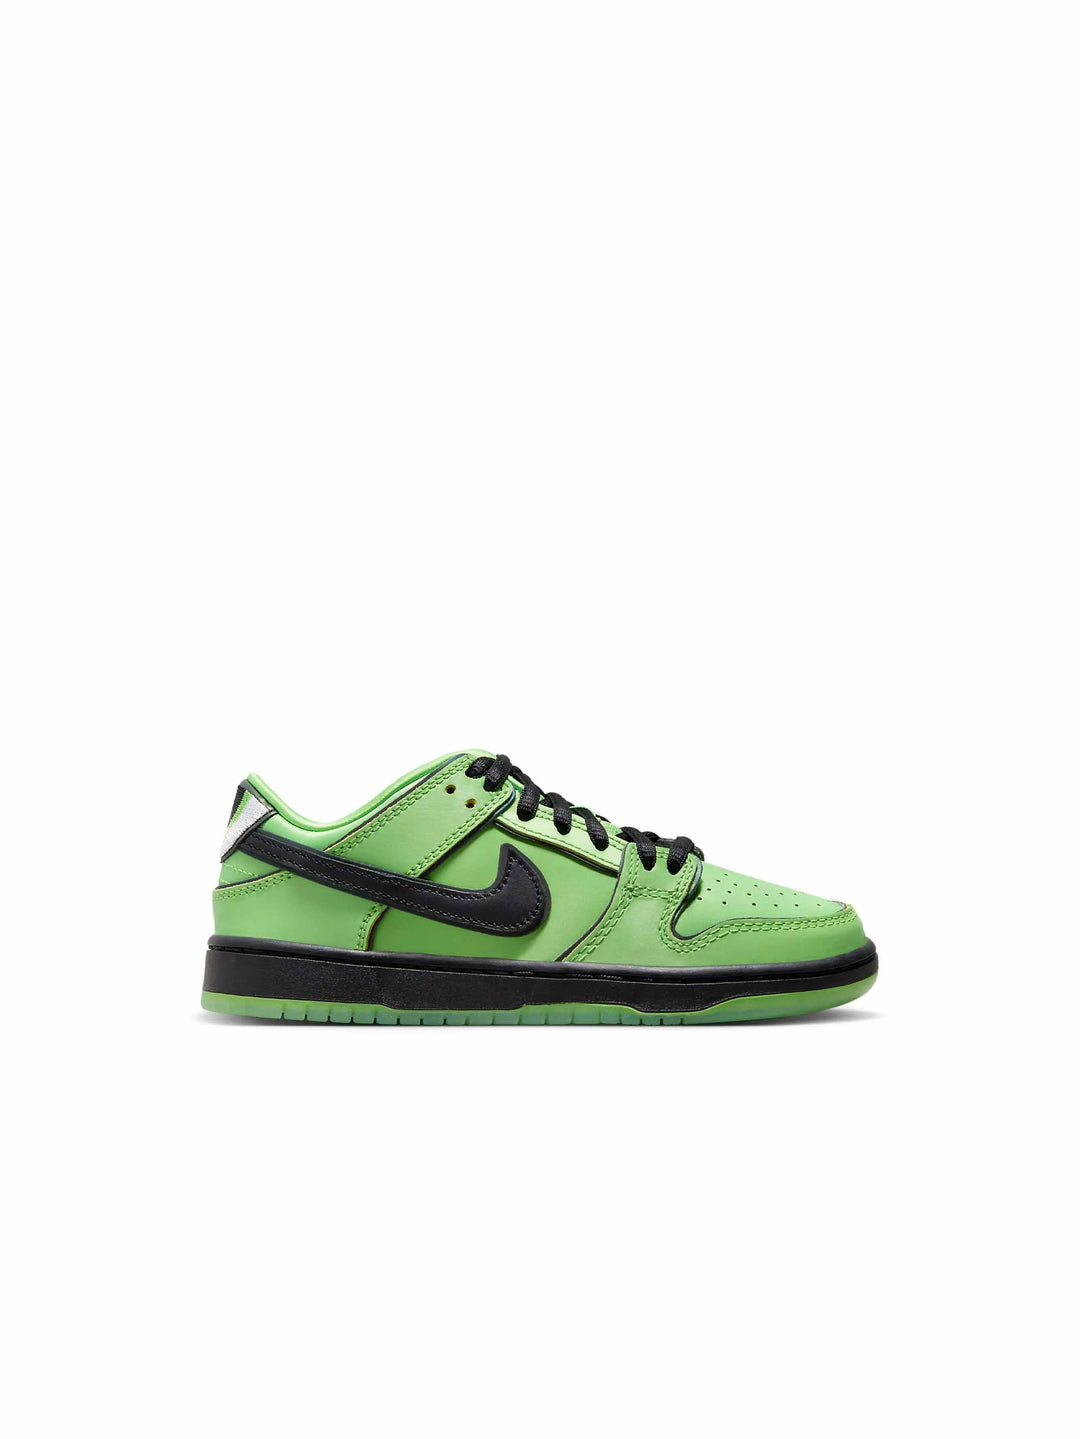 Nike SB Dunk Low The Powerpuff Girls Buttercup (PS) in Auckland, New Zealand - Shop name